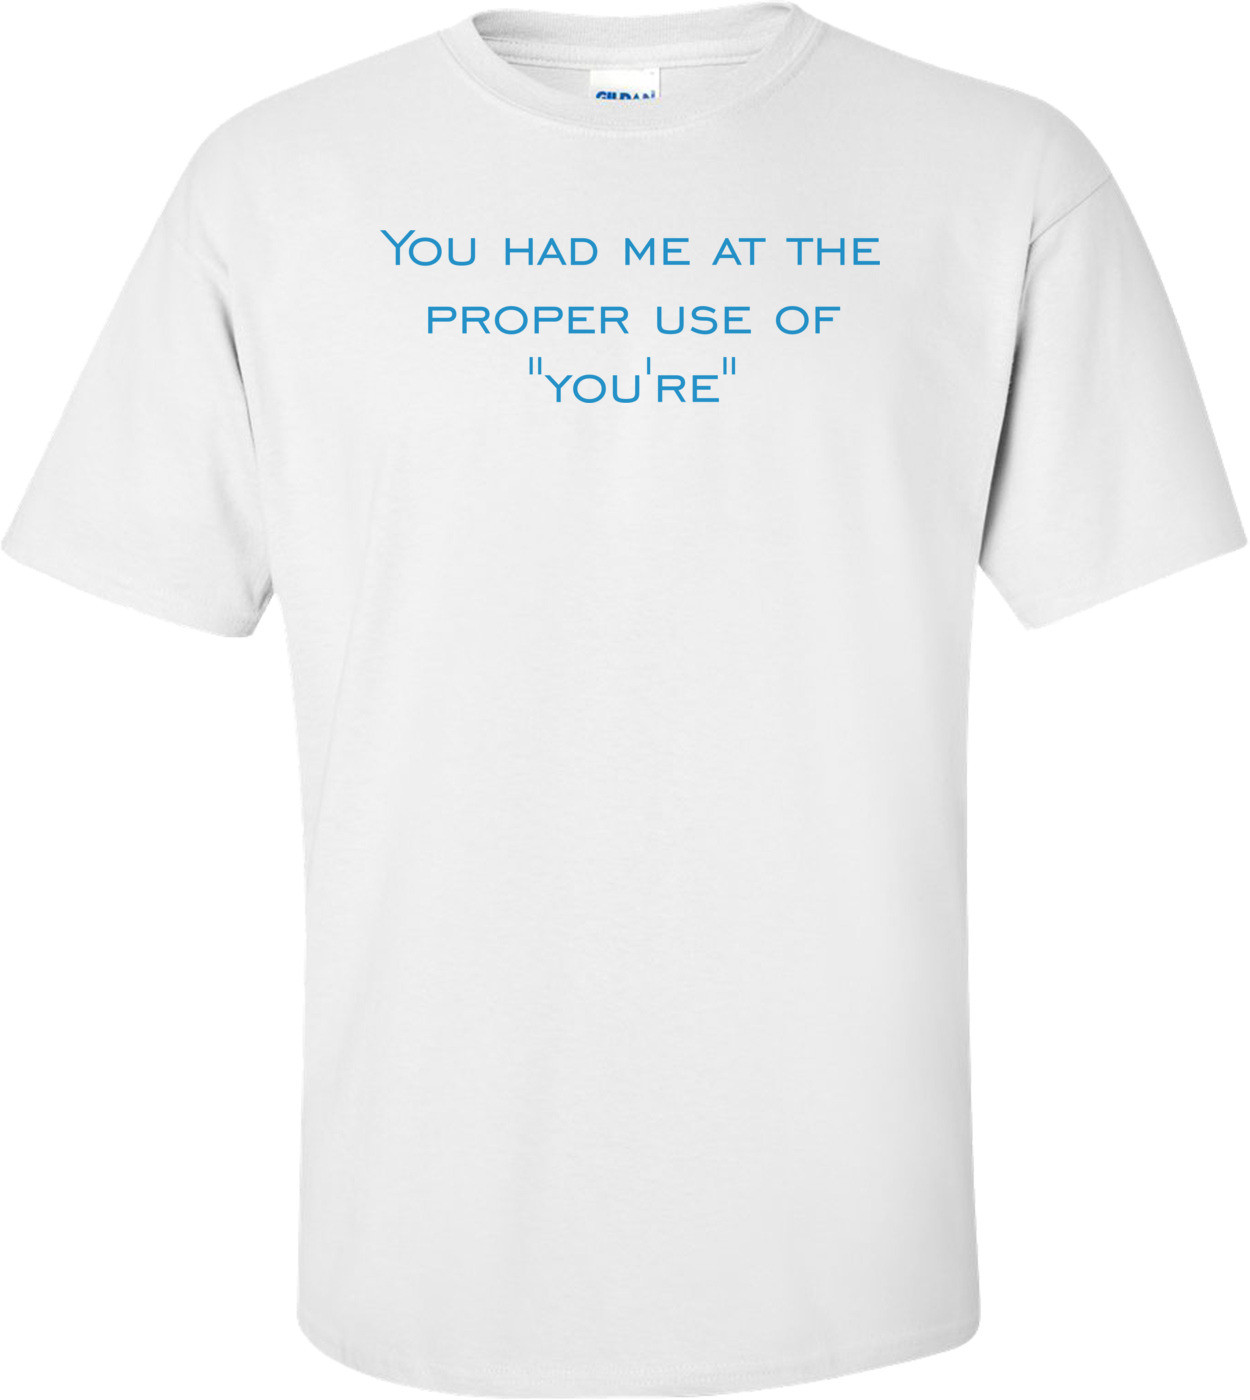 You had me at the proper use of "you're" Shirt